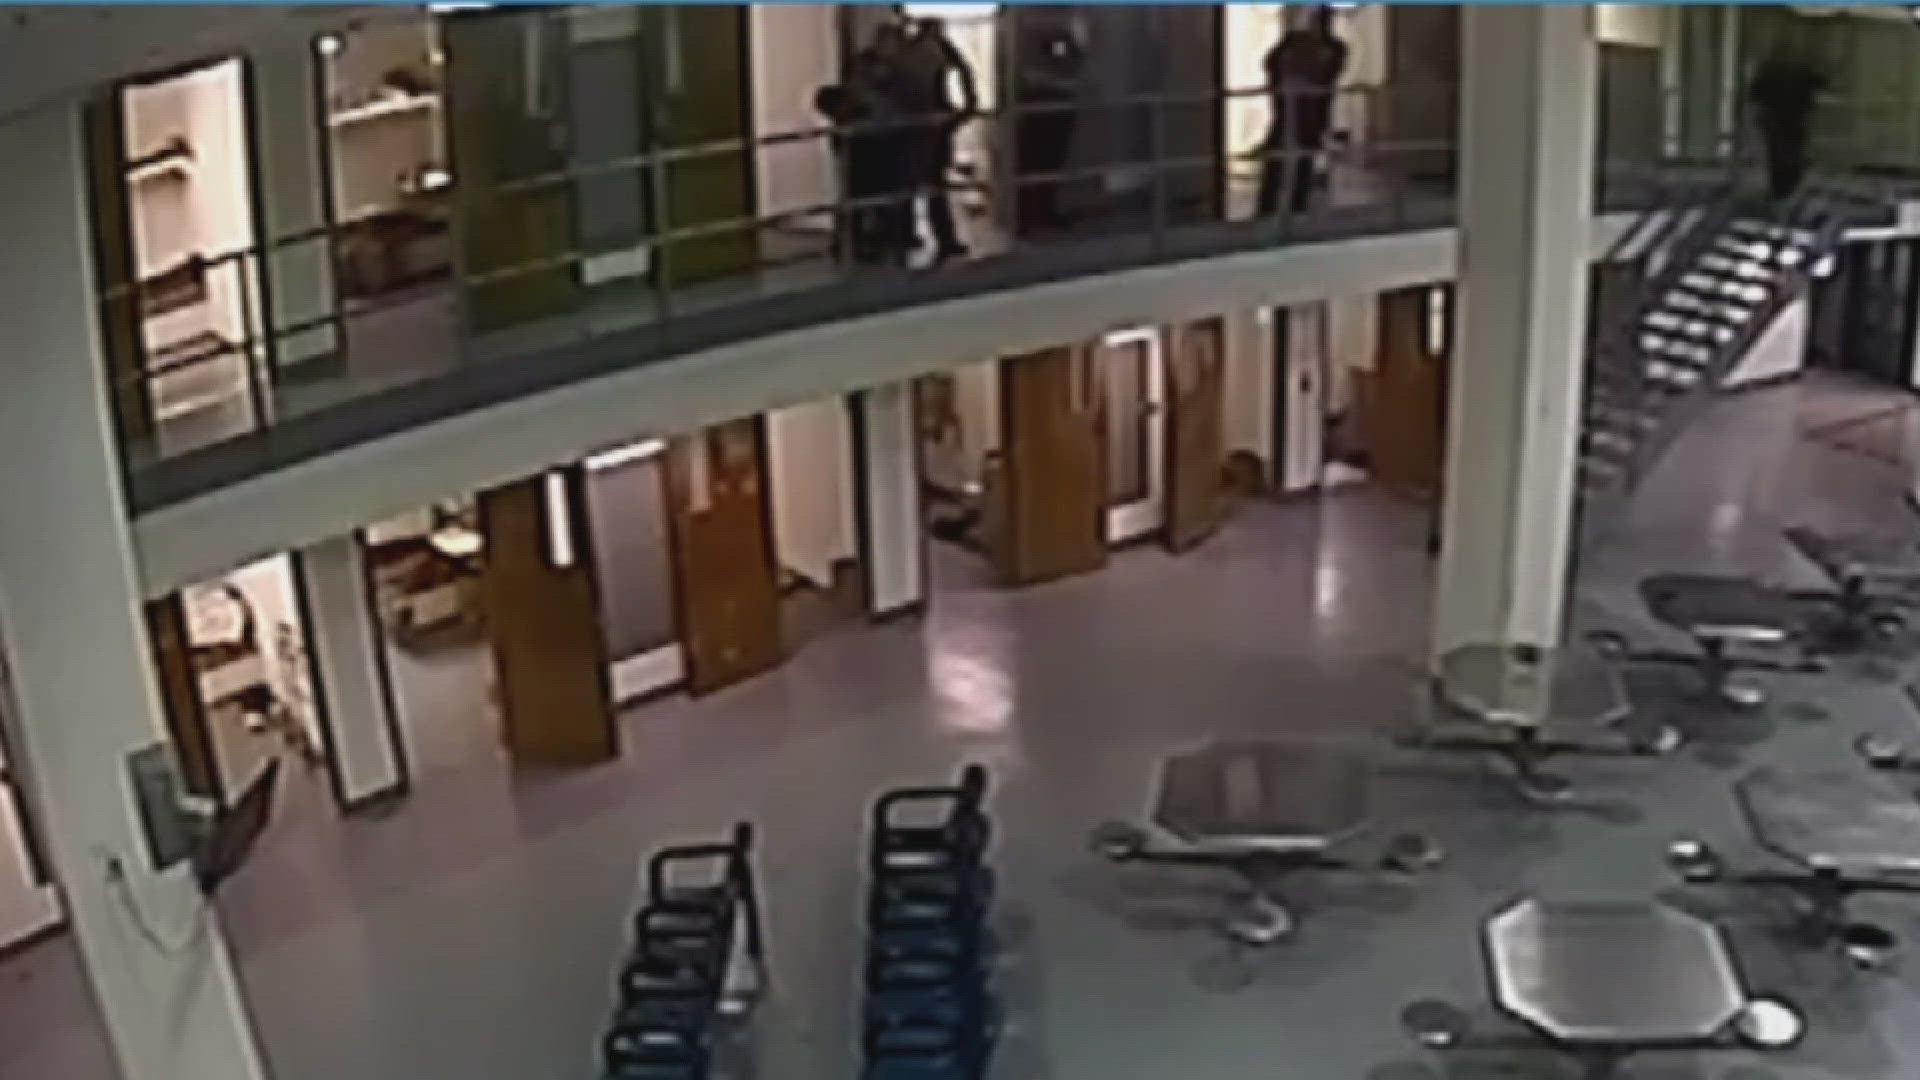 The Tarrant County Sheriff's Office released video and additional details Thursday about the fight with officers that allegedly led to the inmate's death.